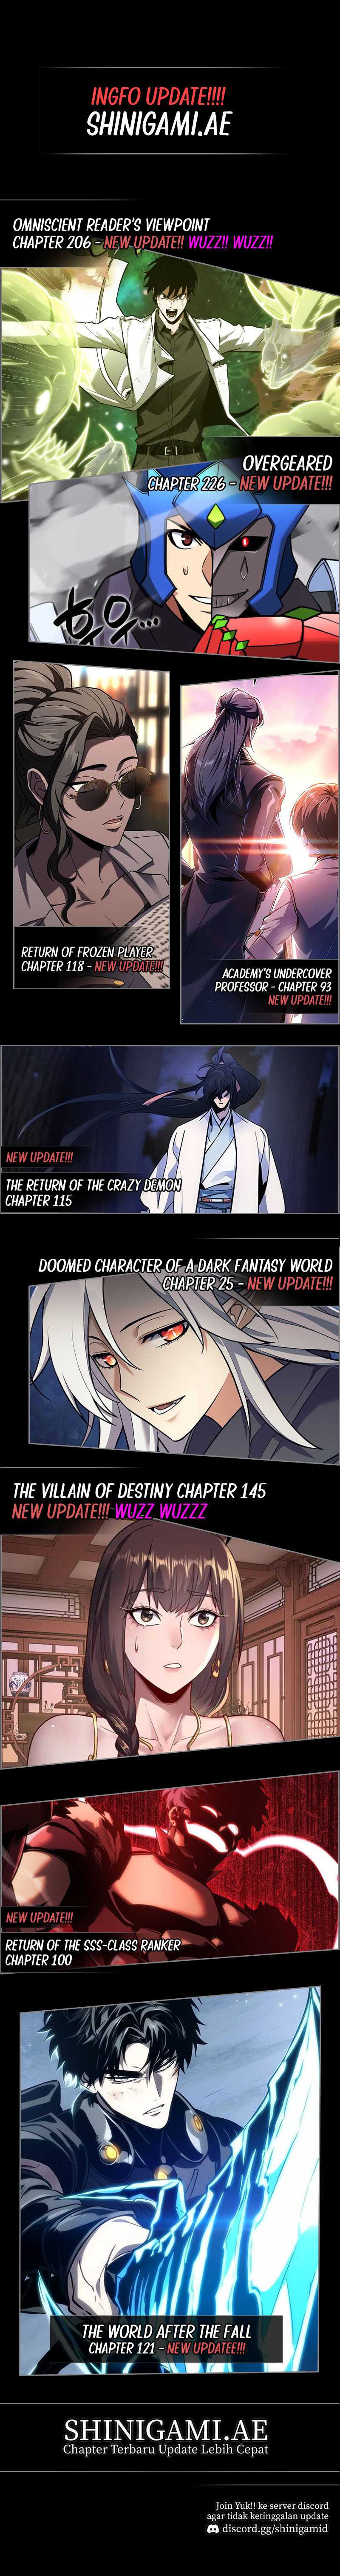 Why I Quit Being The Demon King Chapter 17